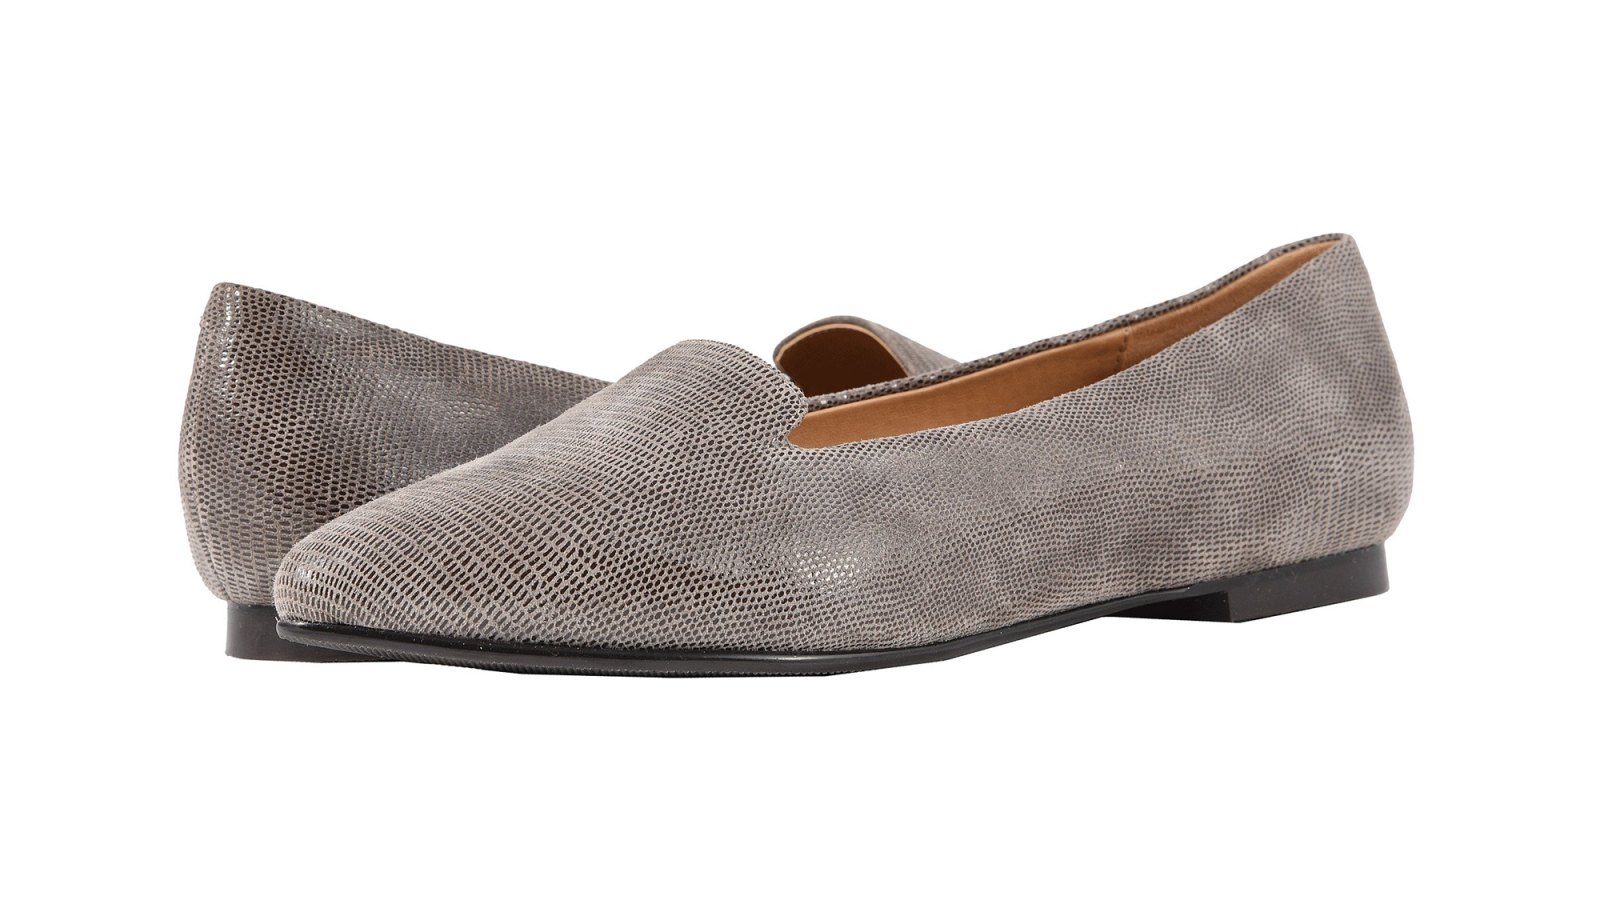 Taupe Flats